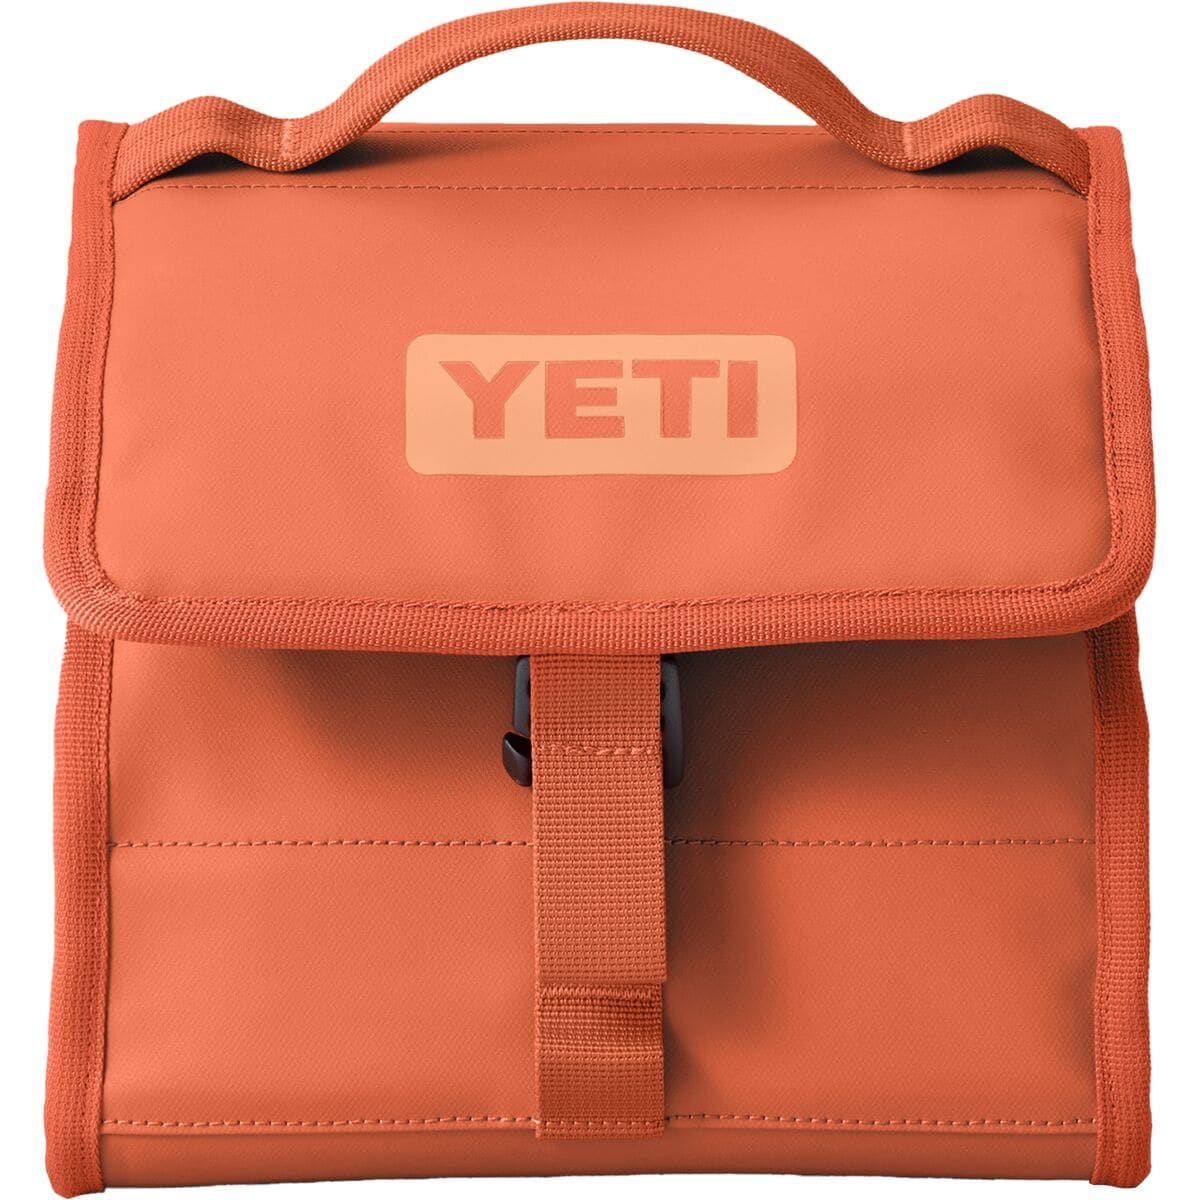 Yeti Daytrip Lunch Box VS Lunch Bag - Which One Is Best For You